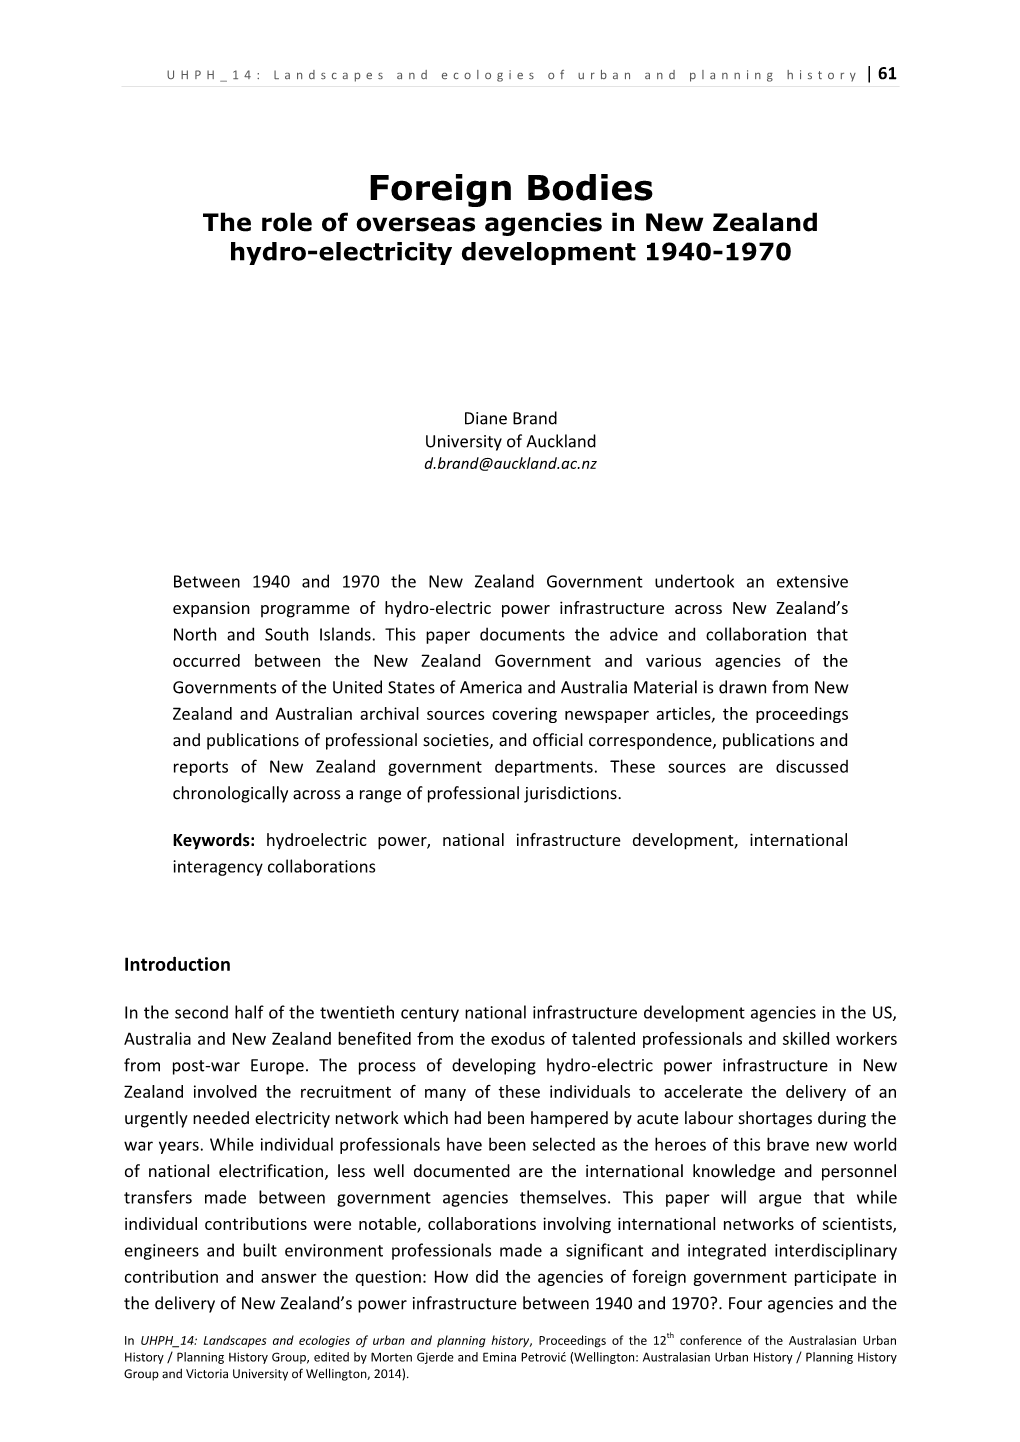 Foreign Bodies the Role of Overseas Agencies in New Zealand Hydro-Electricity Development 1940-1970